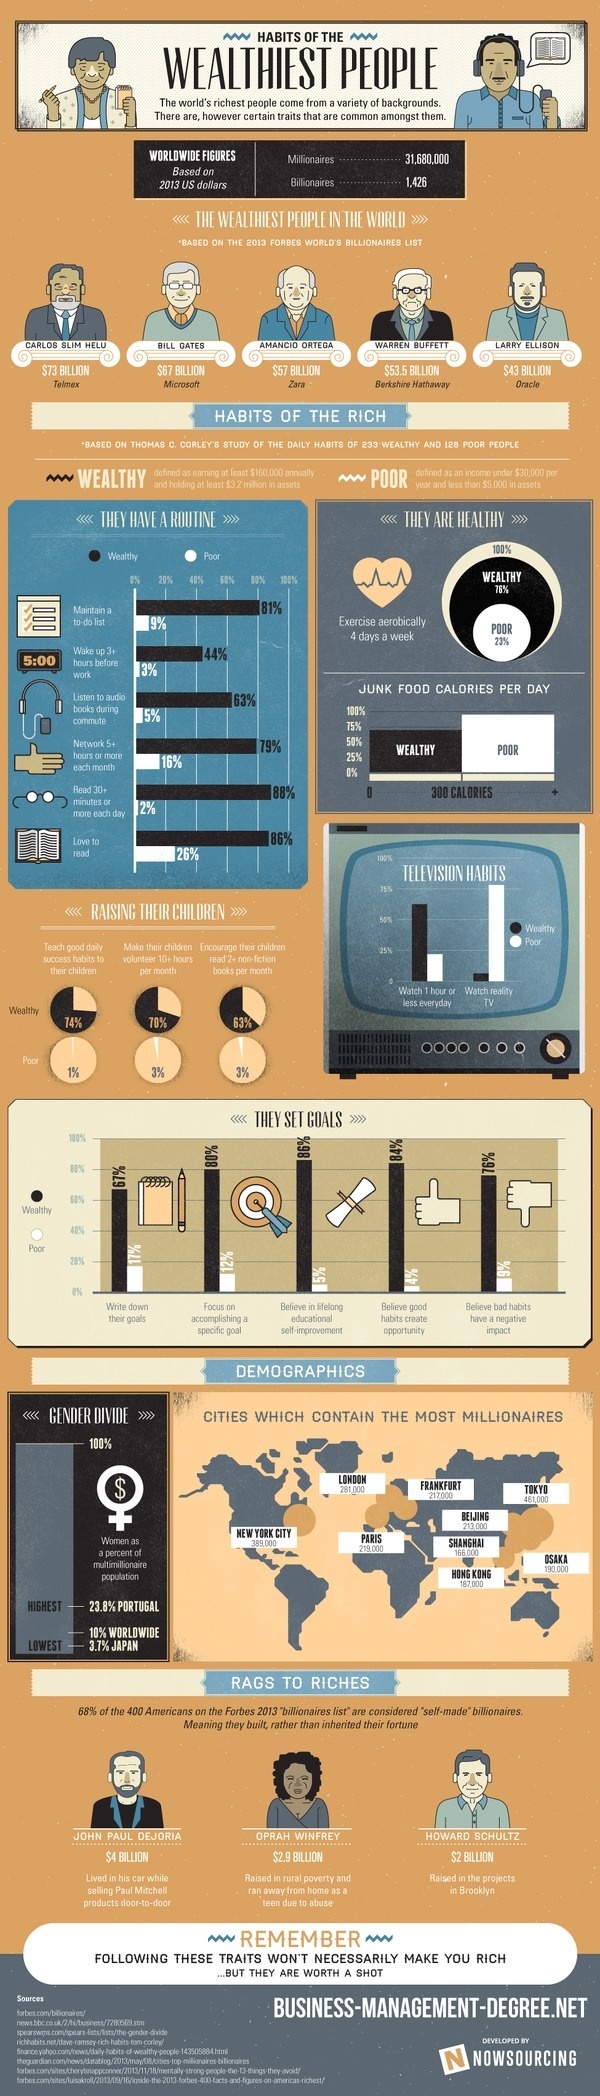 Infographic design idea #262: Habits of the Rich infographic